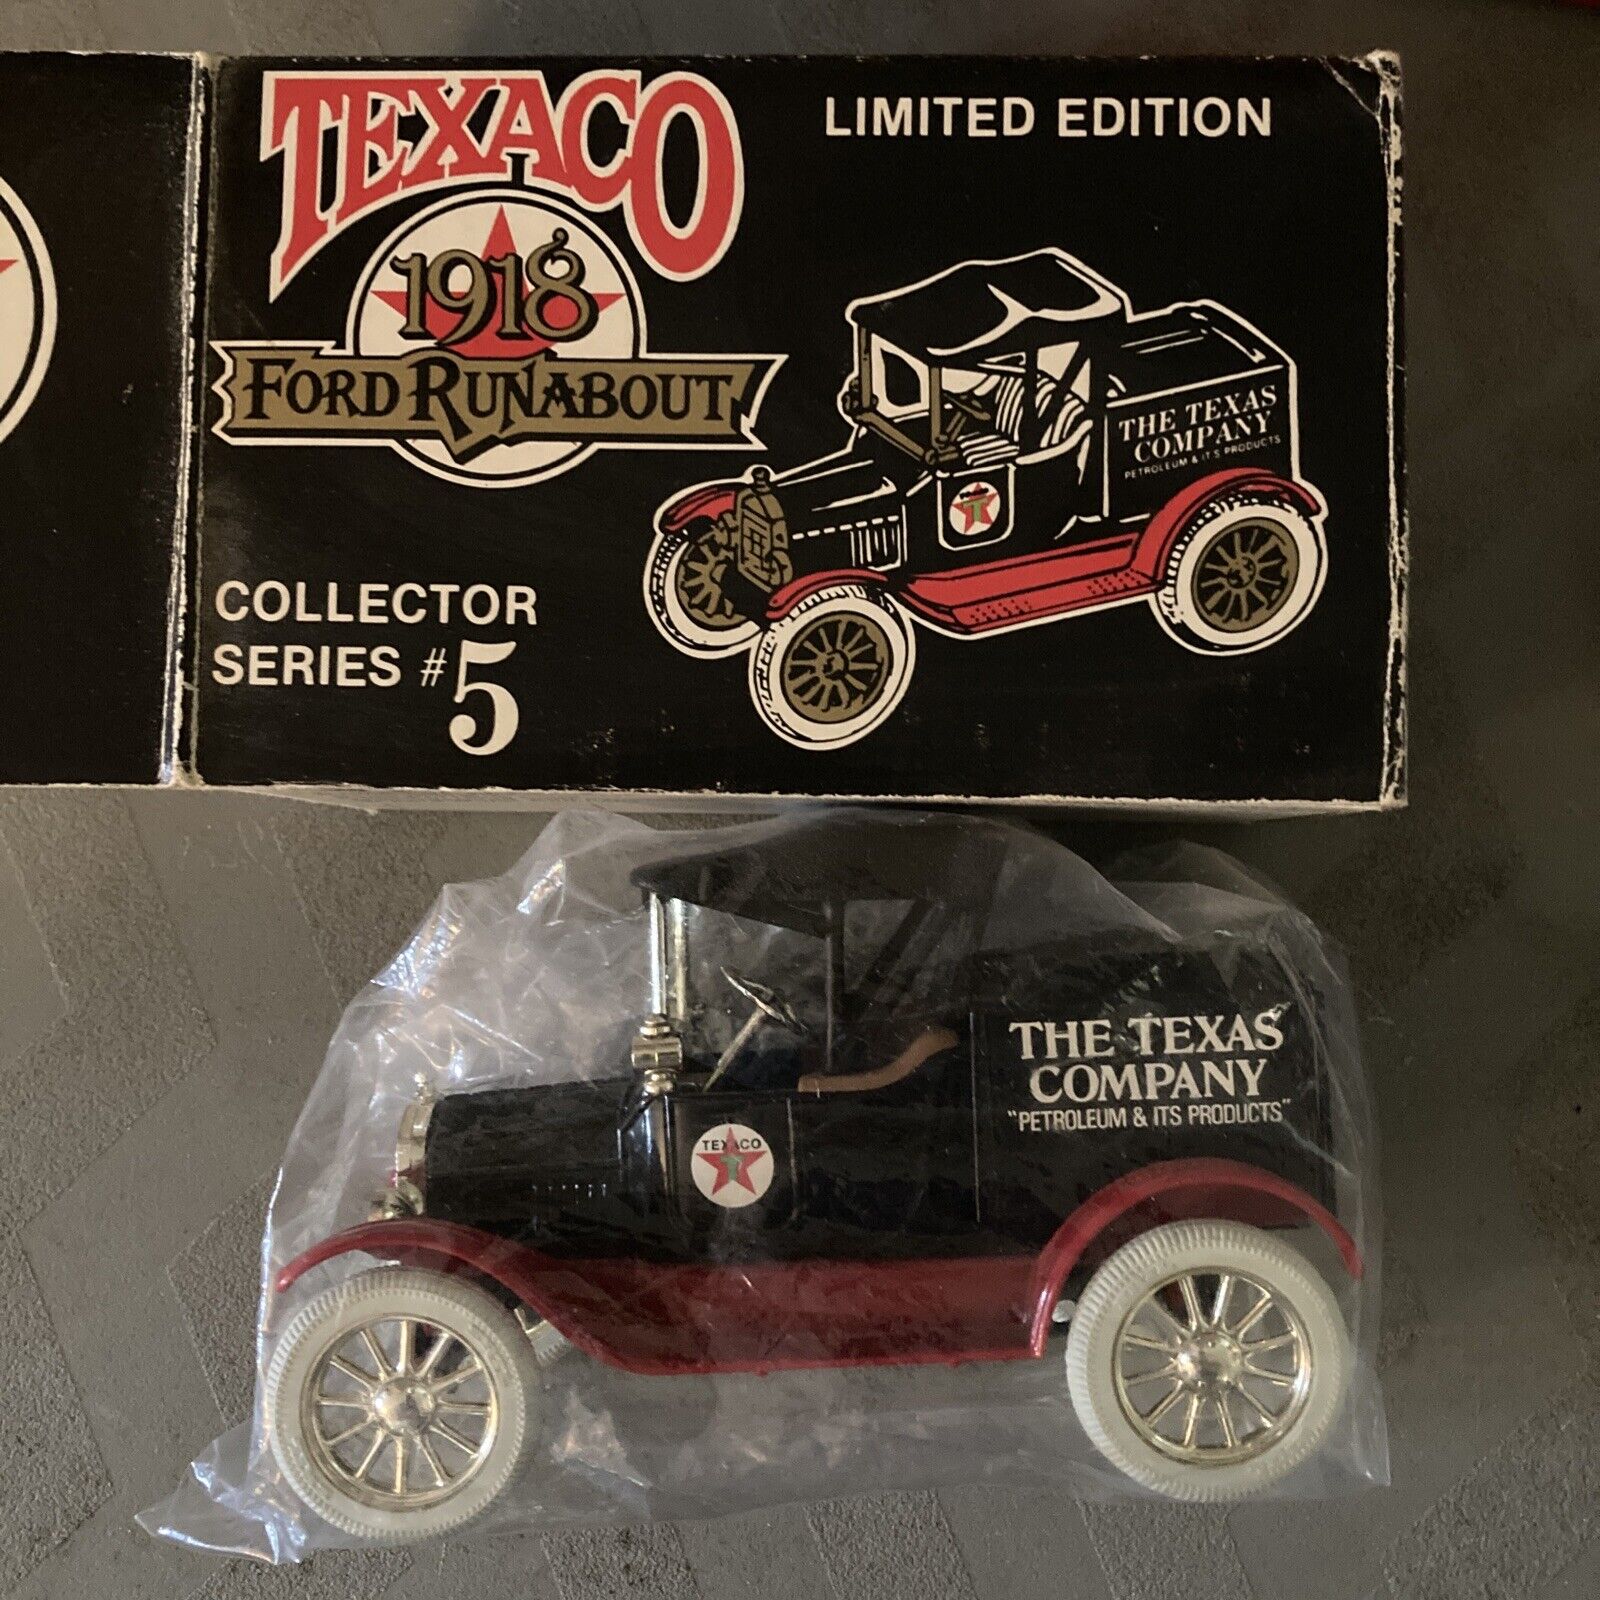 Texaco 1918 Ford Runabout Die Cast Metal Locking Coin Bank  With Key Limit Ed.